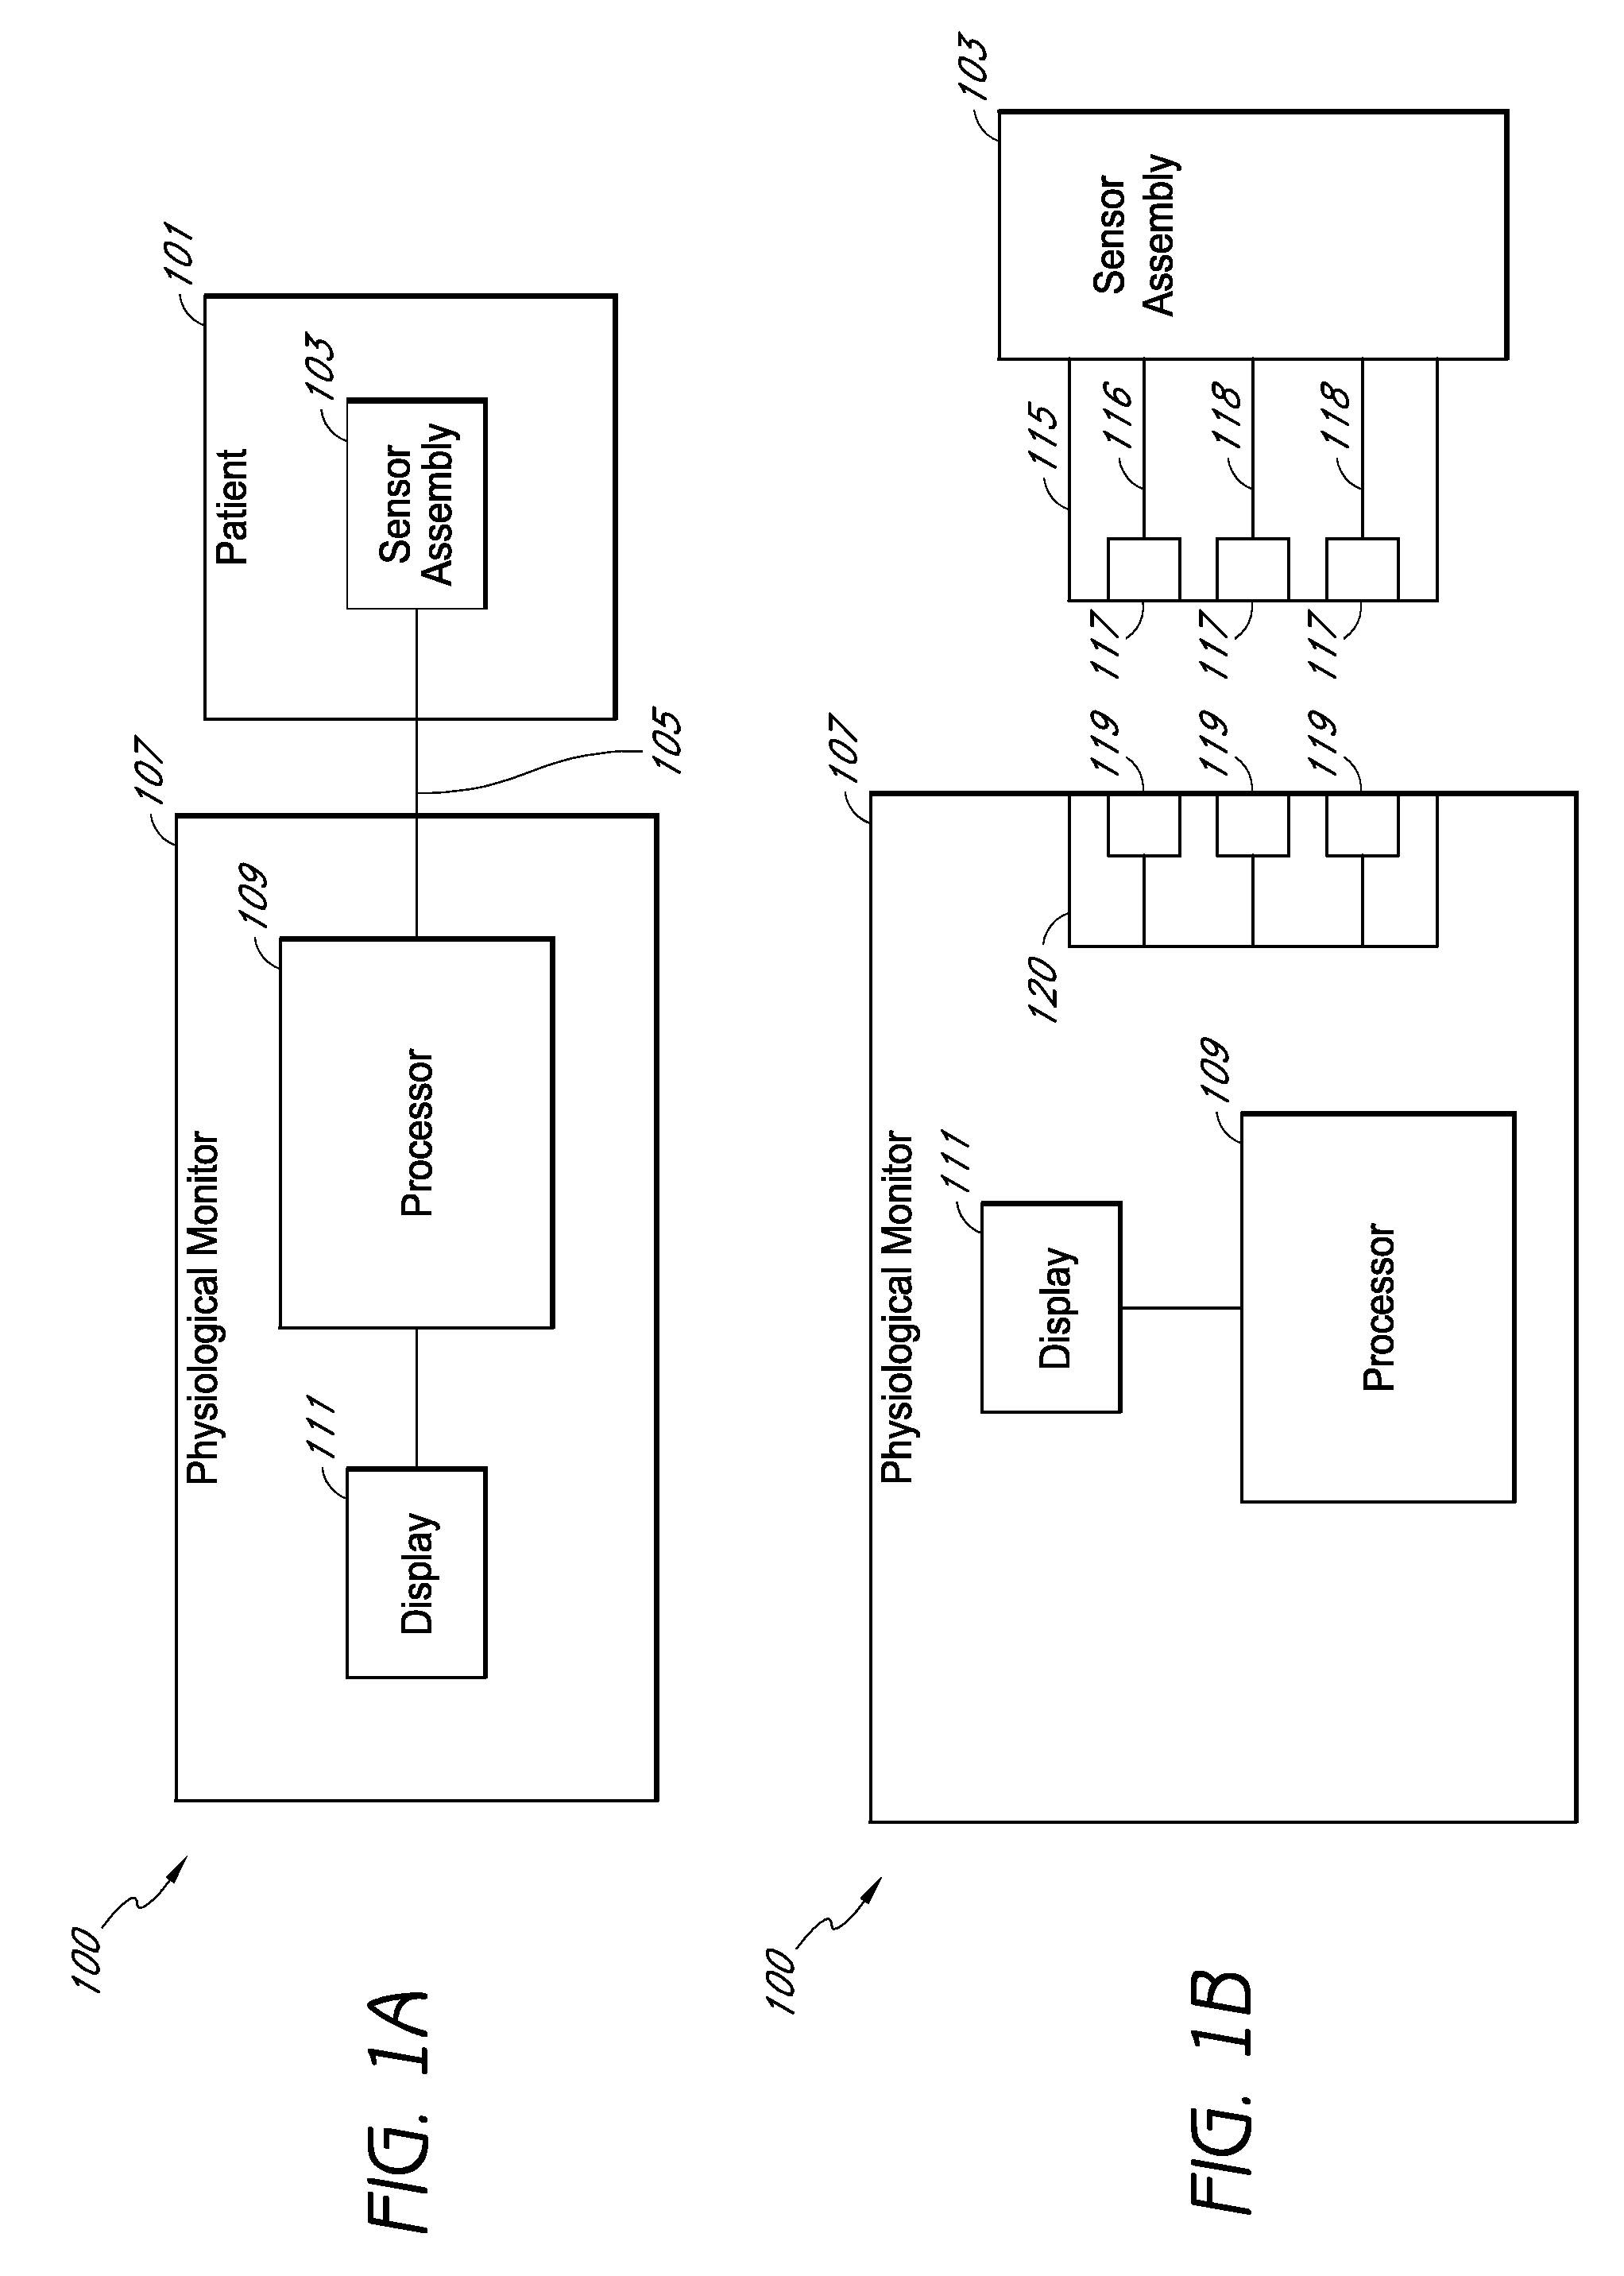 Acoustic respiratory monitoring systems and methods